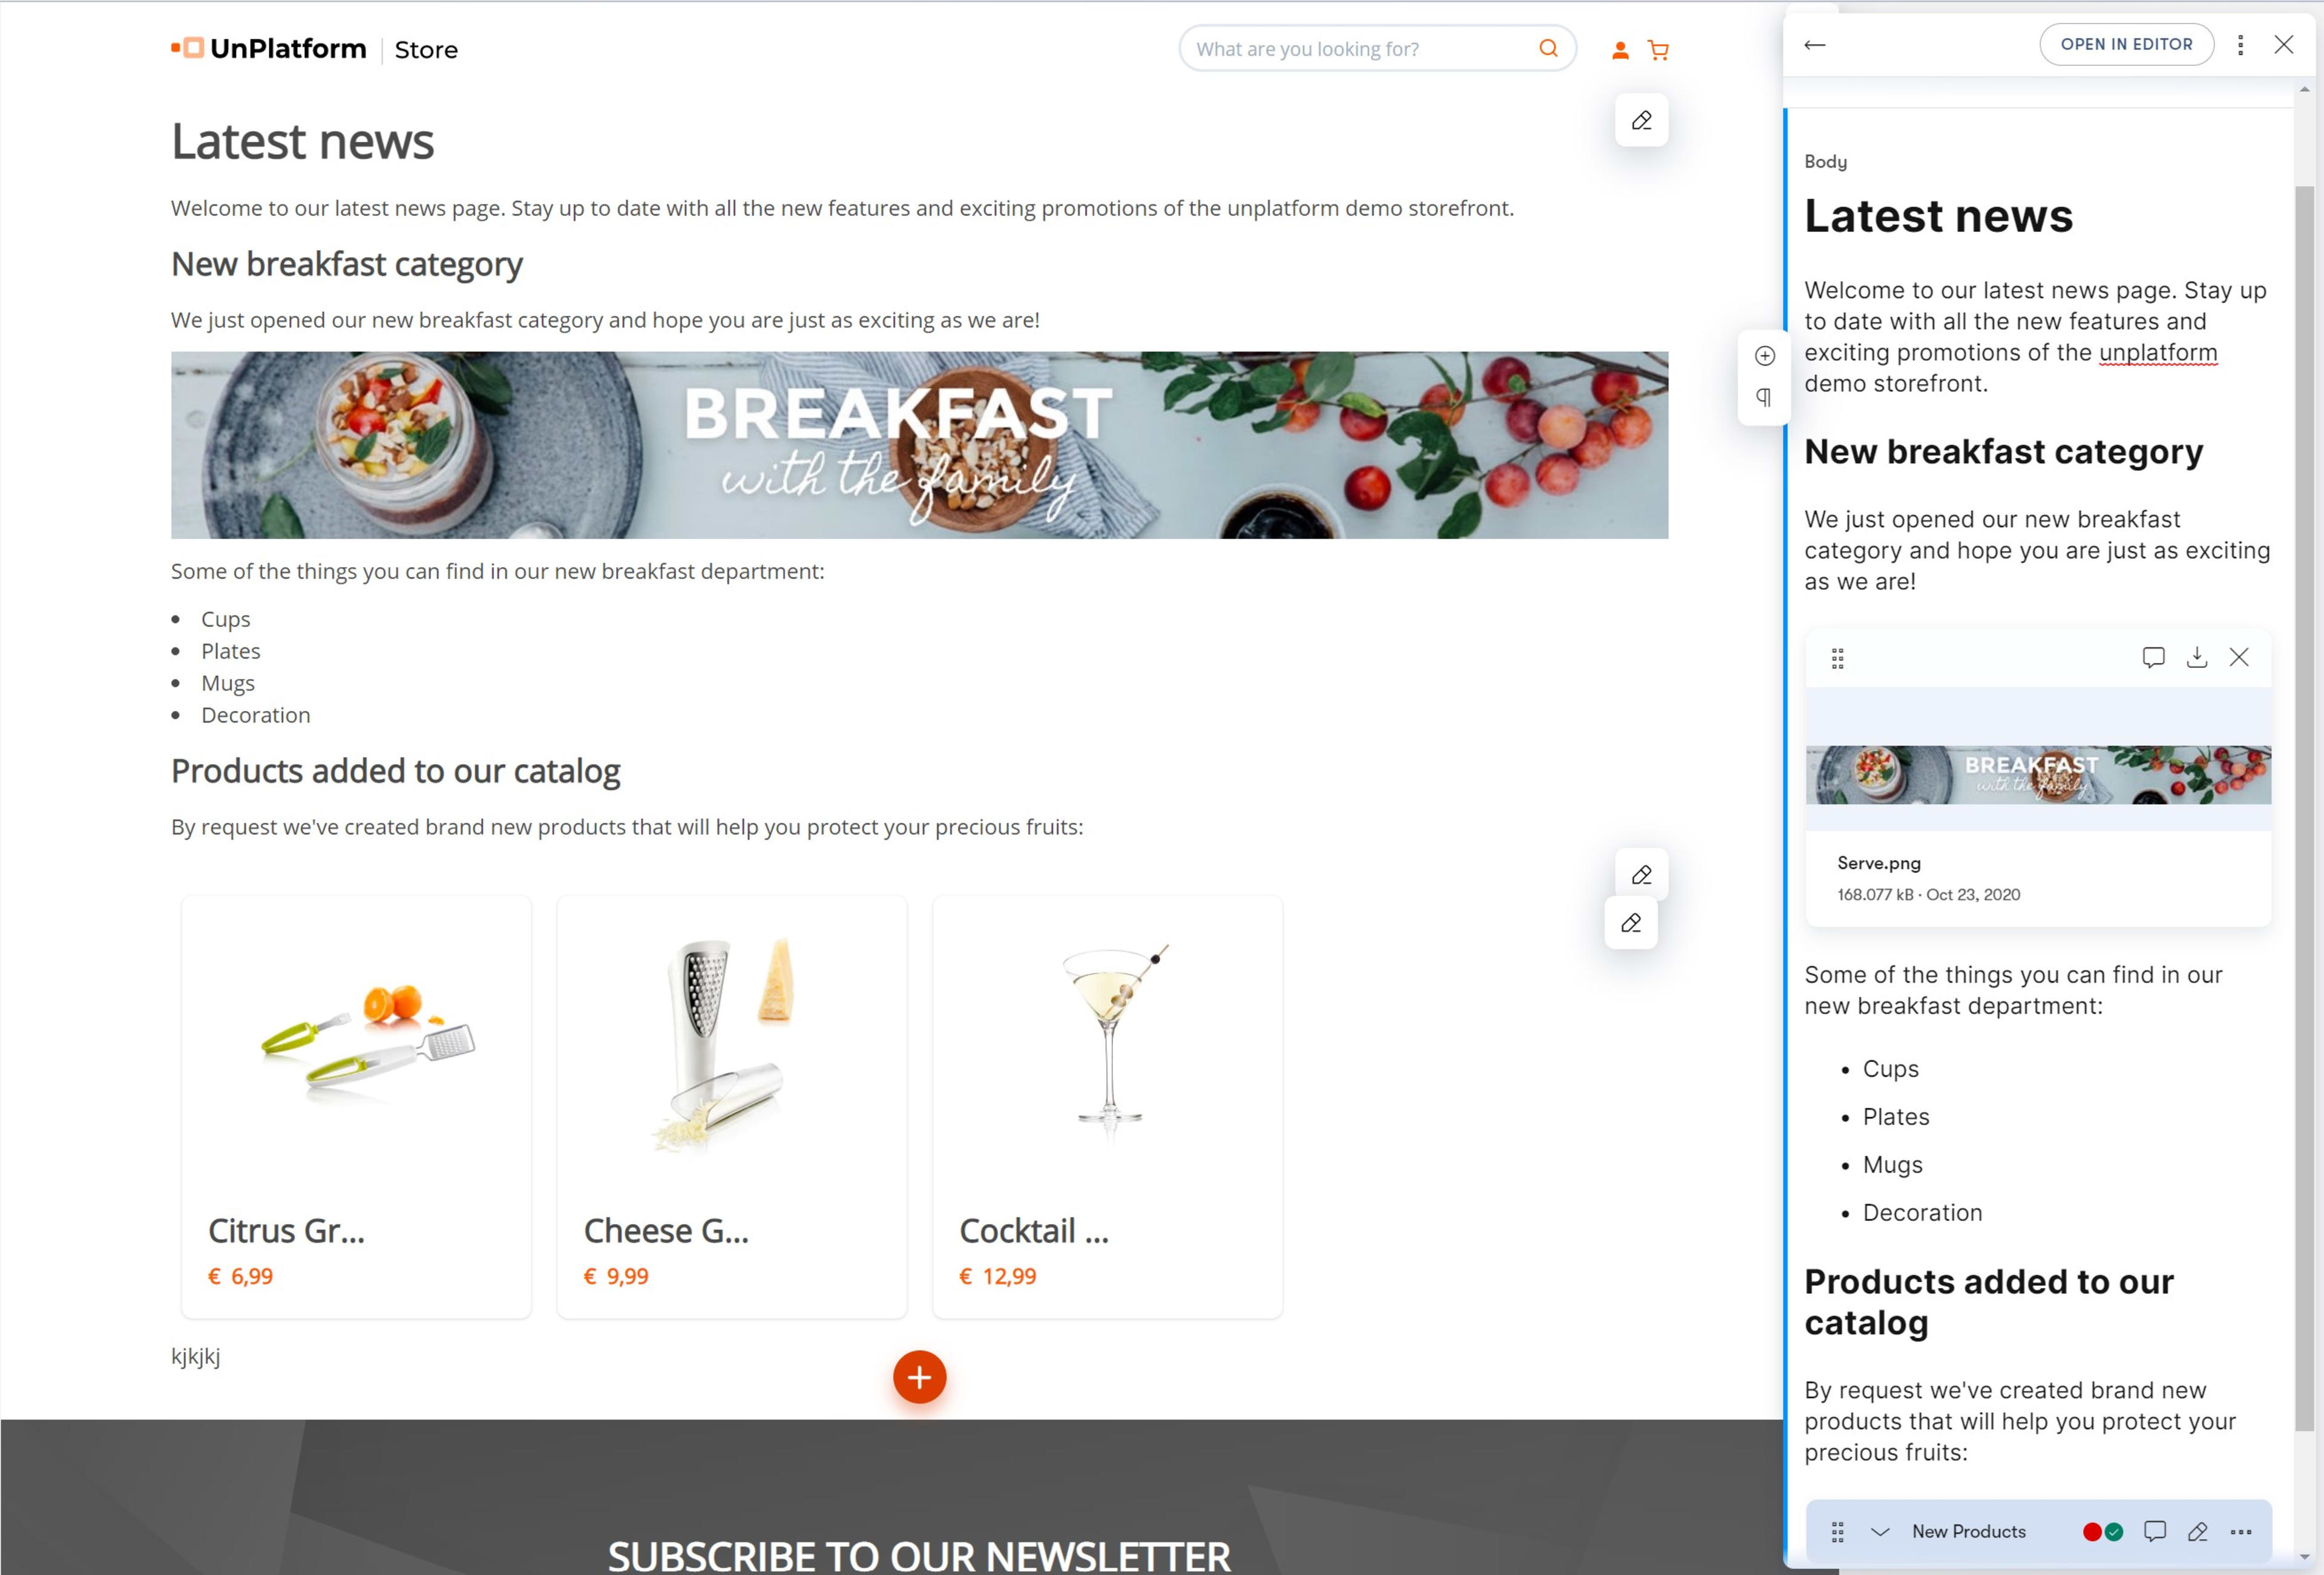 Kentico Kontent allows for in-context editing with Web Spotlight